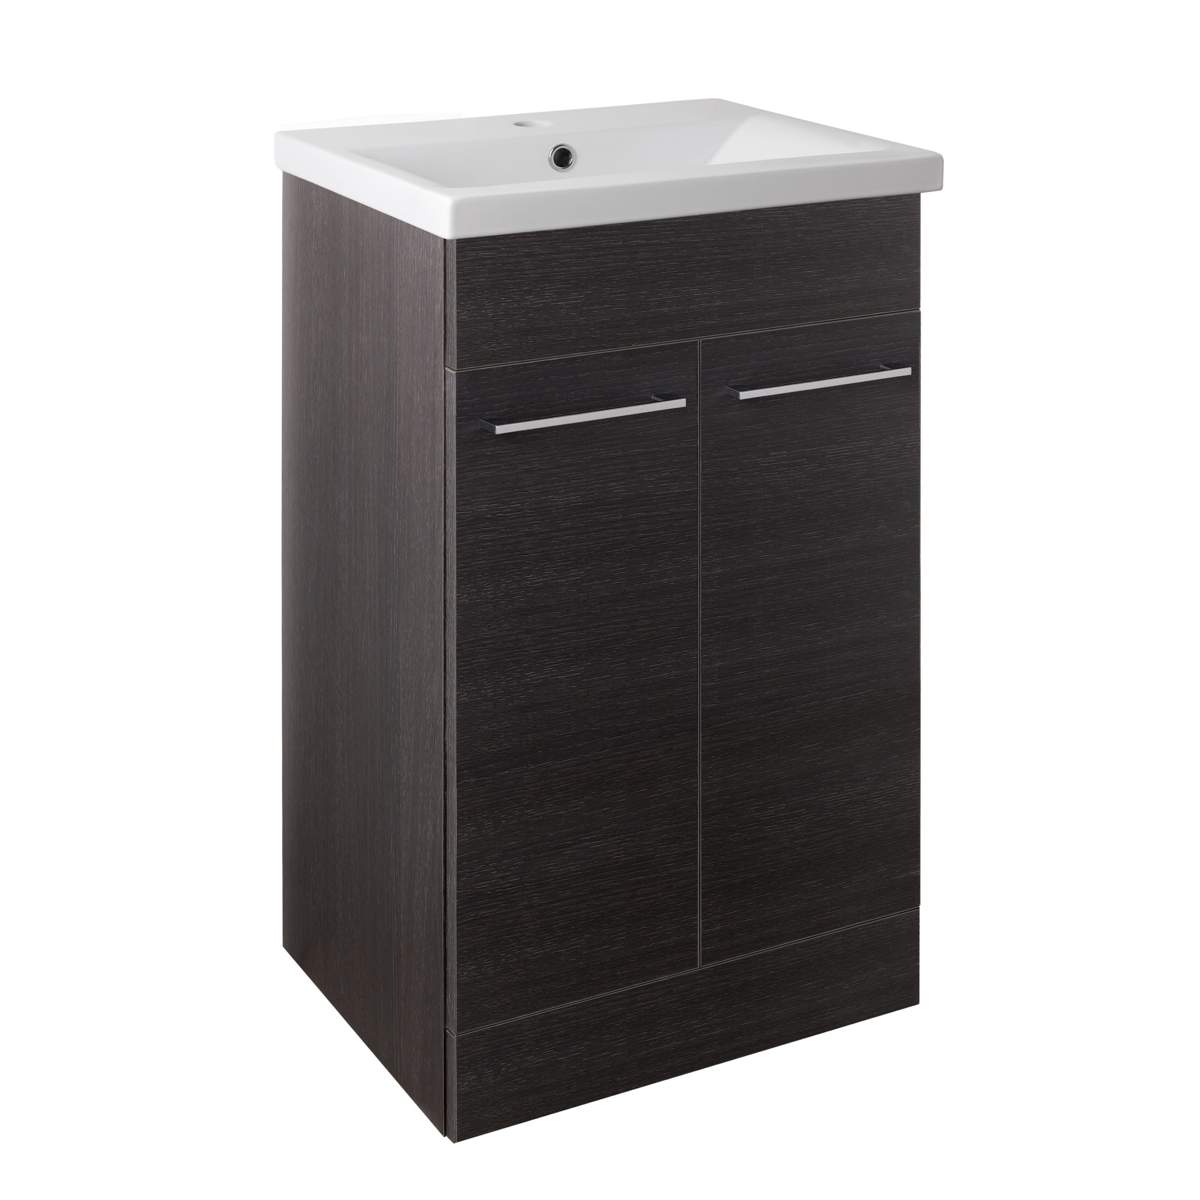 JTP Pace Units 500mm Floor Standing Unit with Doors and Basin in Black (PFS502BK + P500BS)